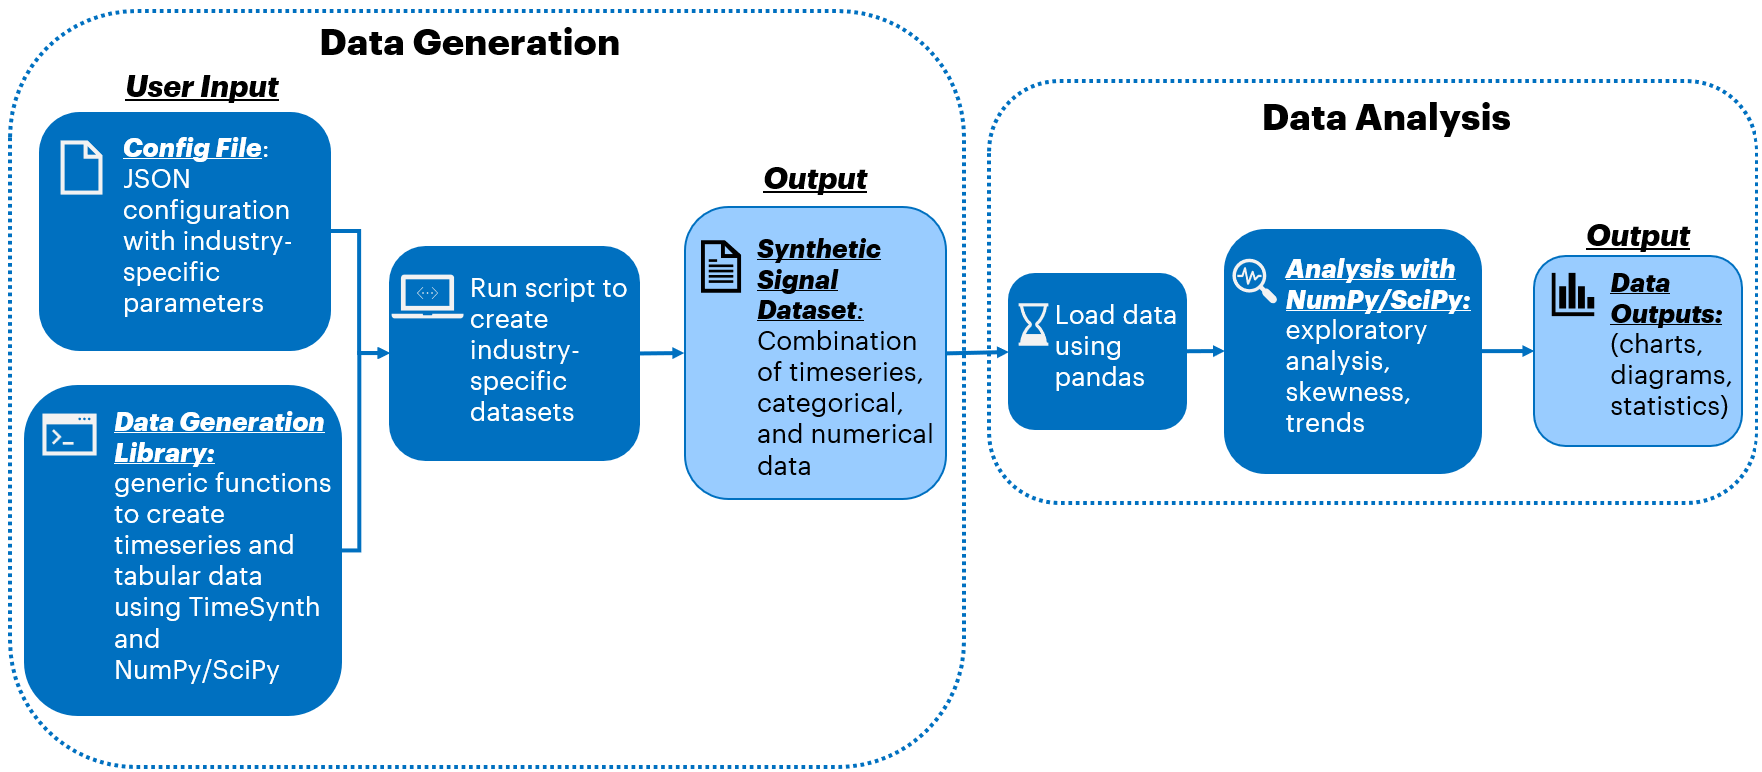 illustration of the data generation and data analysis capabilities of the Intel Distribution for Python